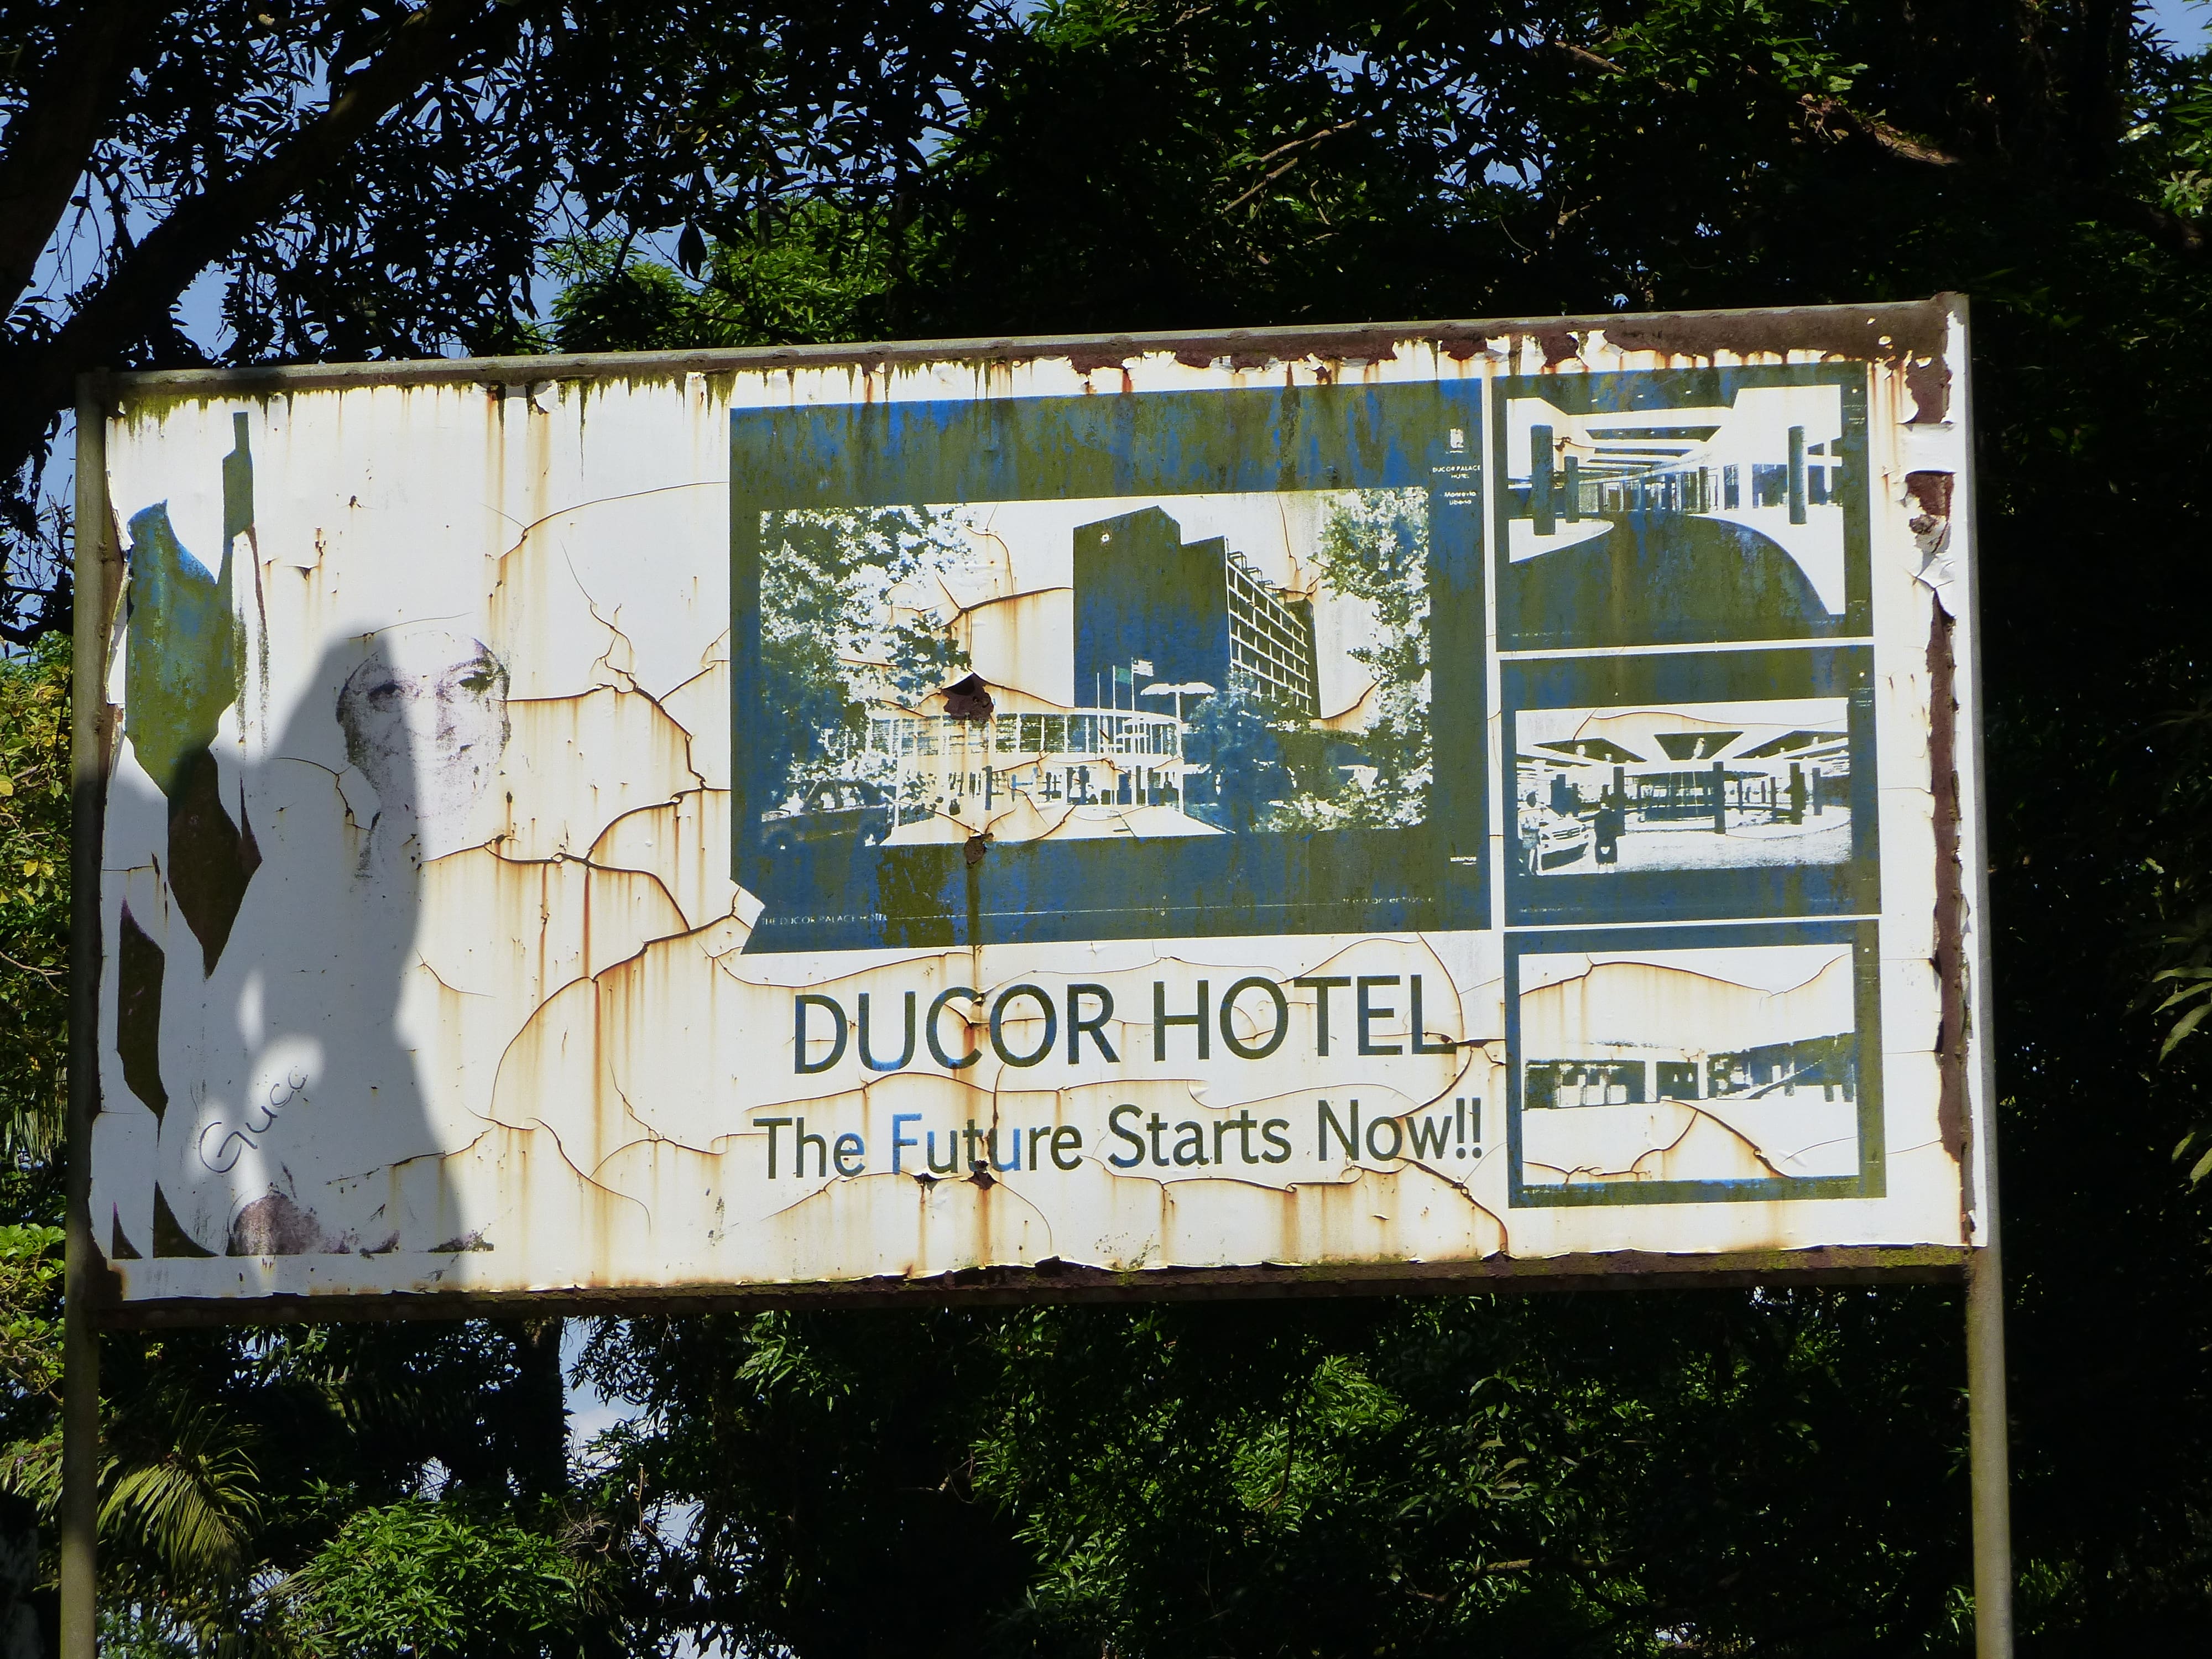 Ducor Hotel sign